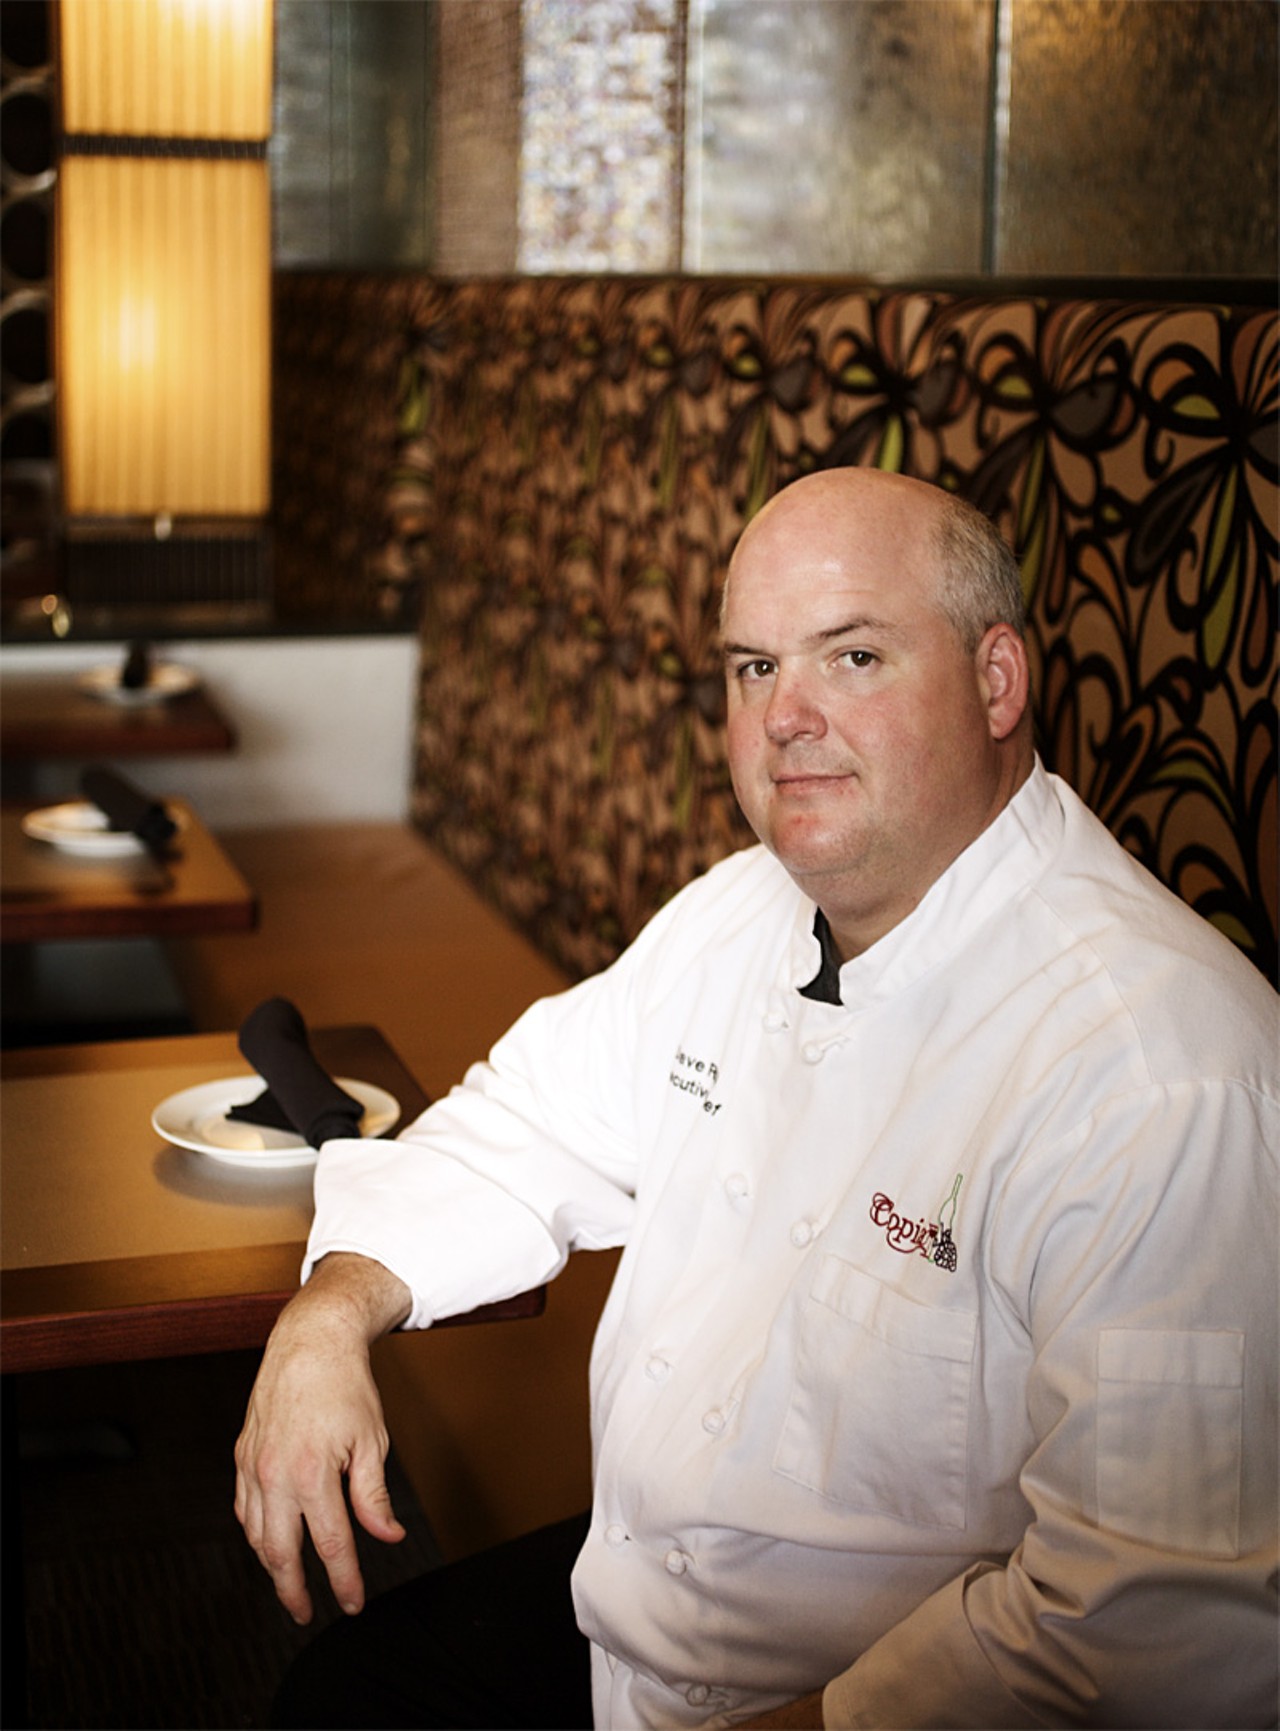 Executive Chef Dave Rookin the front dining room of Copia Urban Winery.